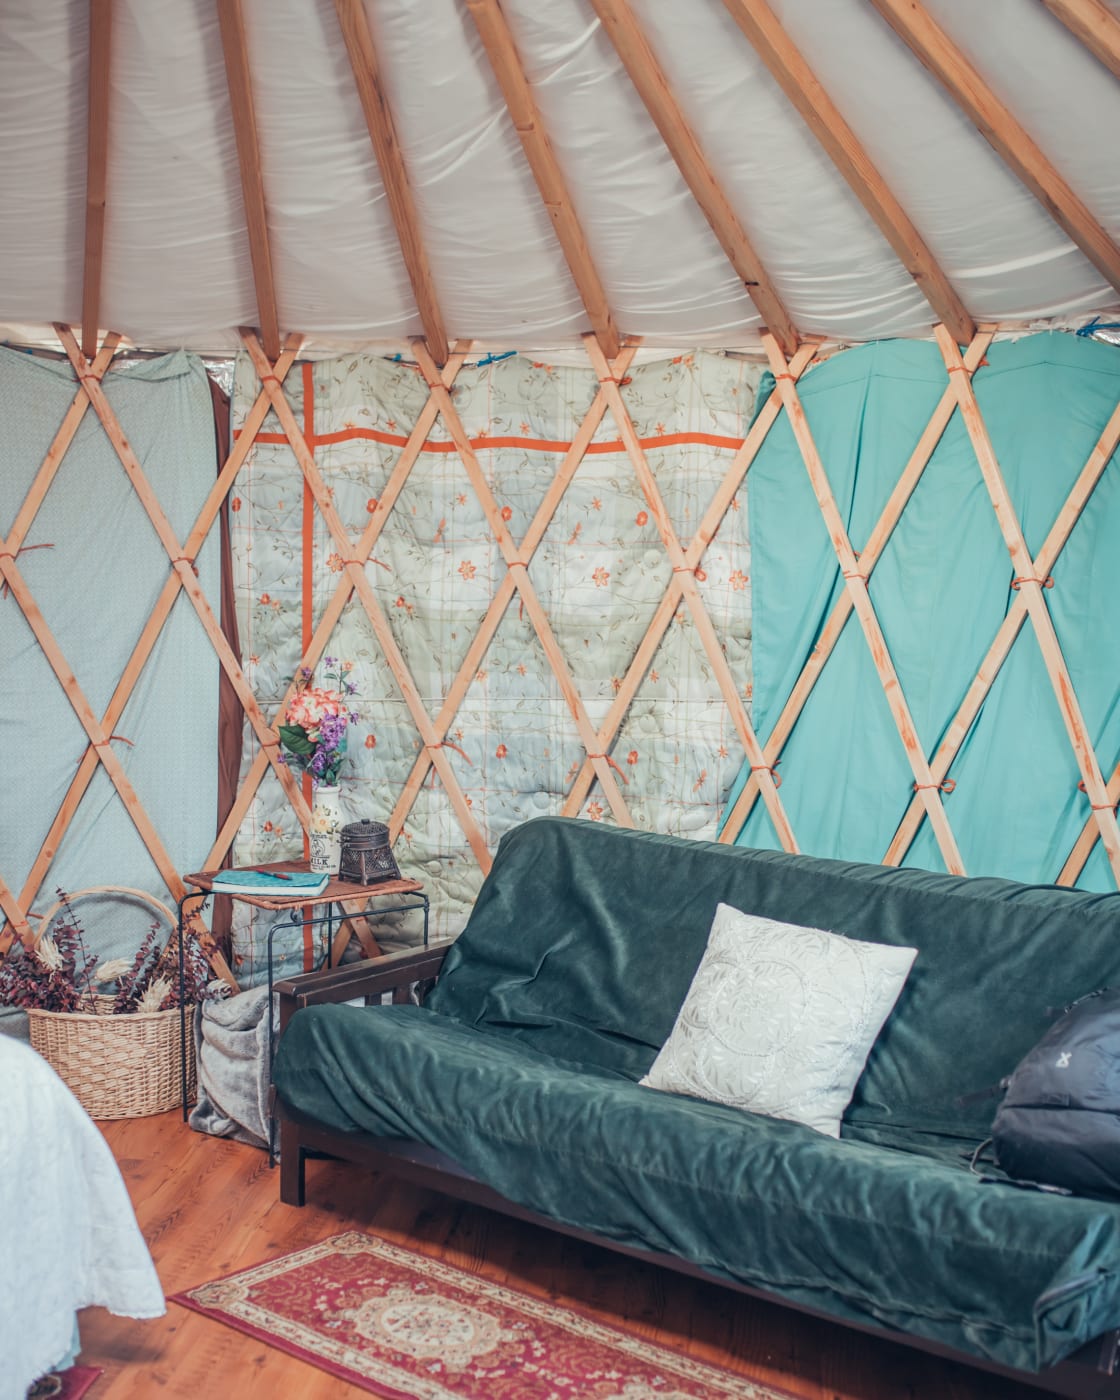 The cozy interior of the yurt features a table and chairs, a futon couch, a queen bed, lanterns for light, lots of blankets, powerful propane heaters, a camping stove, and cookery!